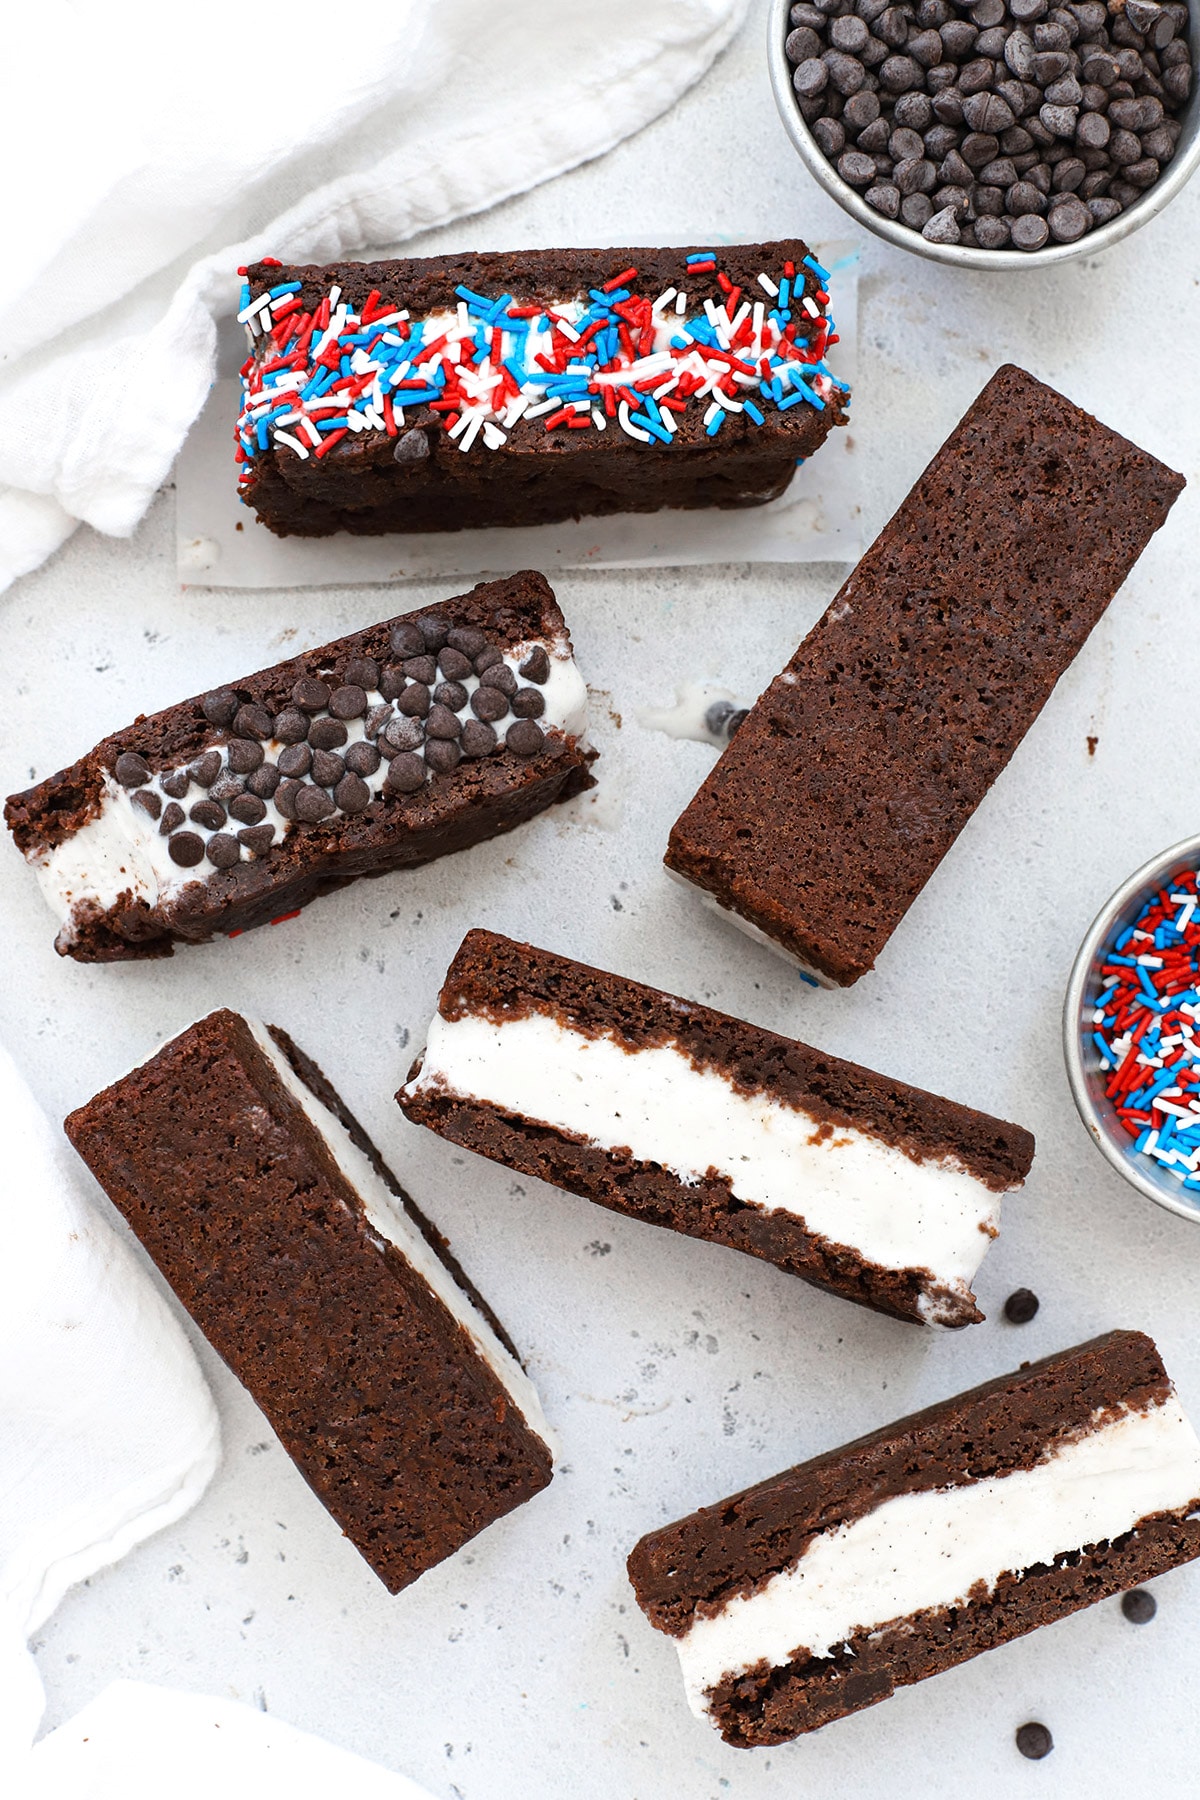 Overhead view of gluten-free brownie ice cream sandwiches cut into bars